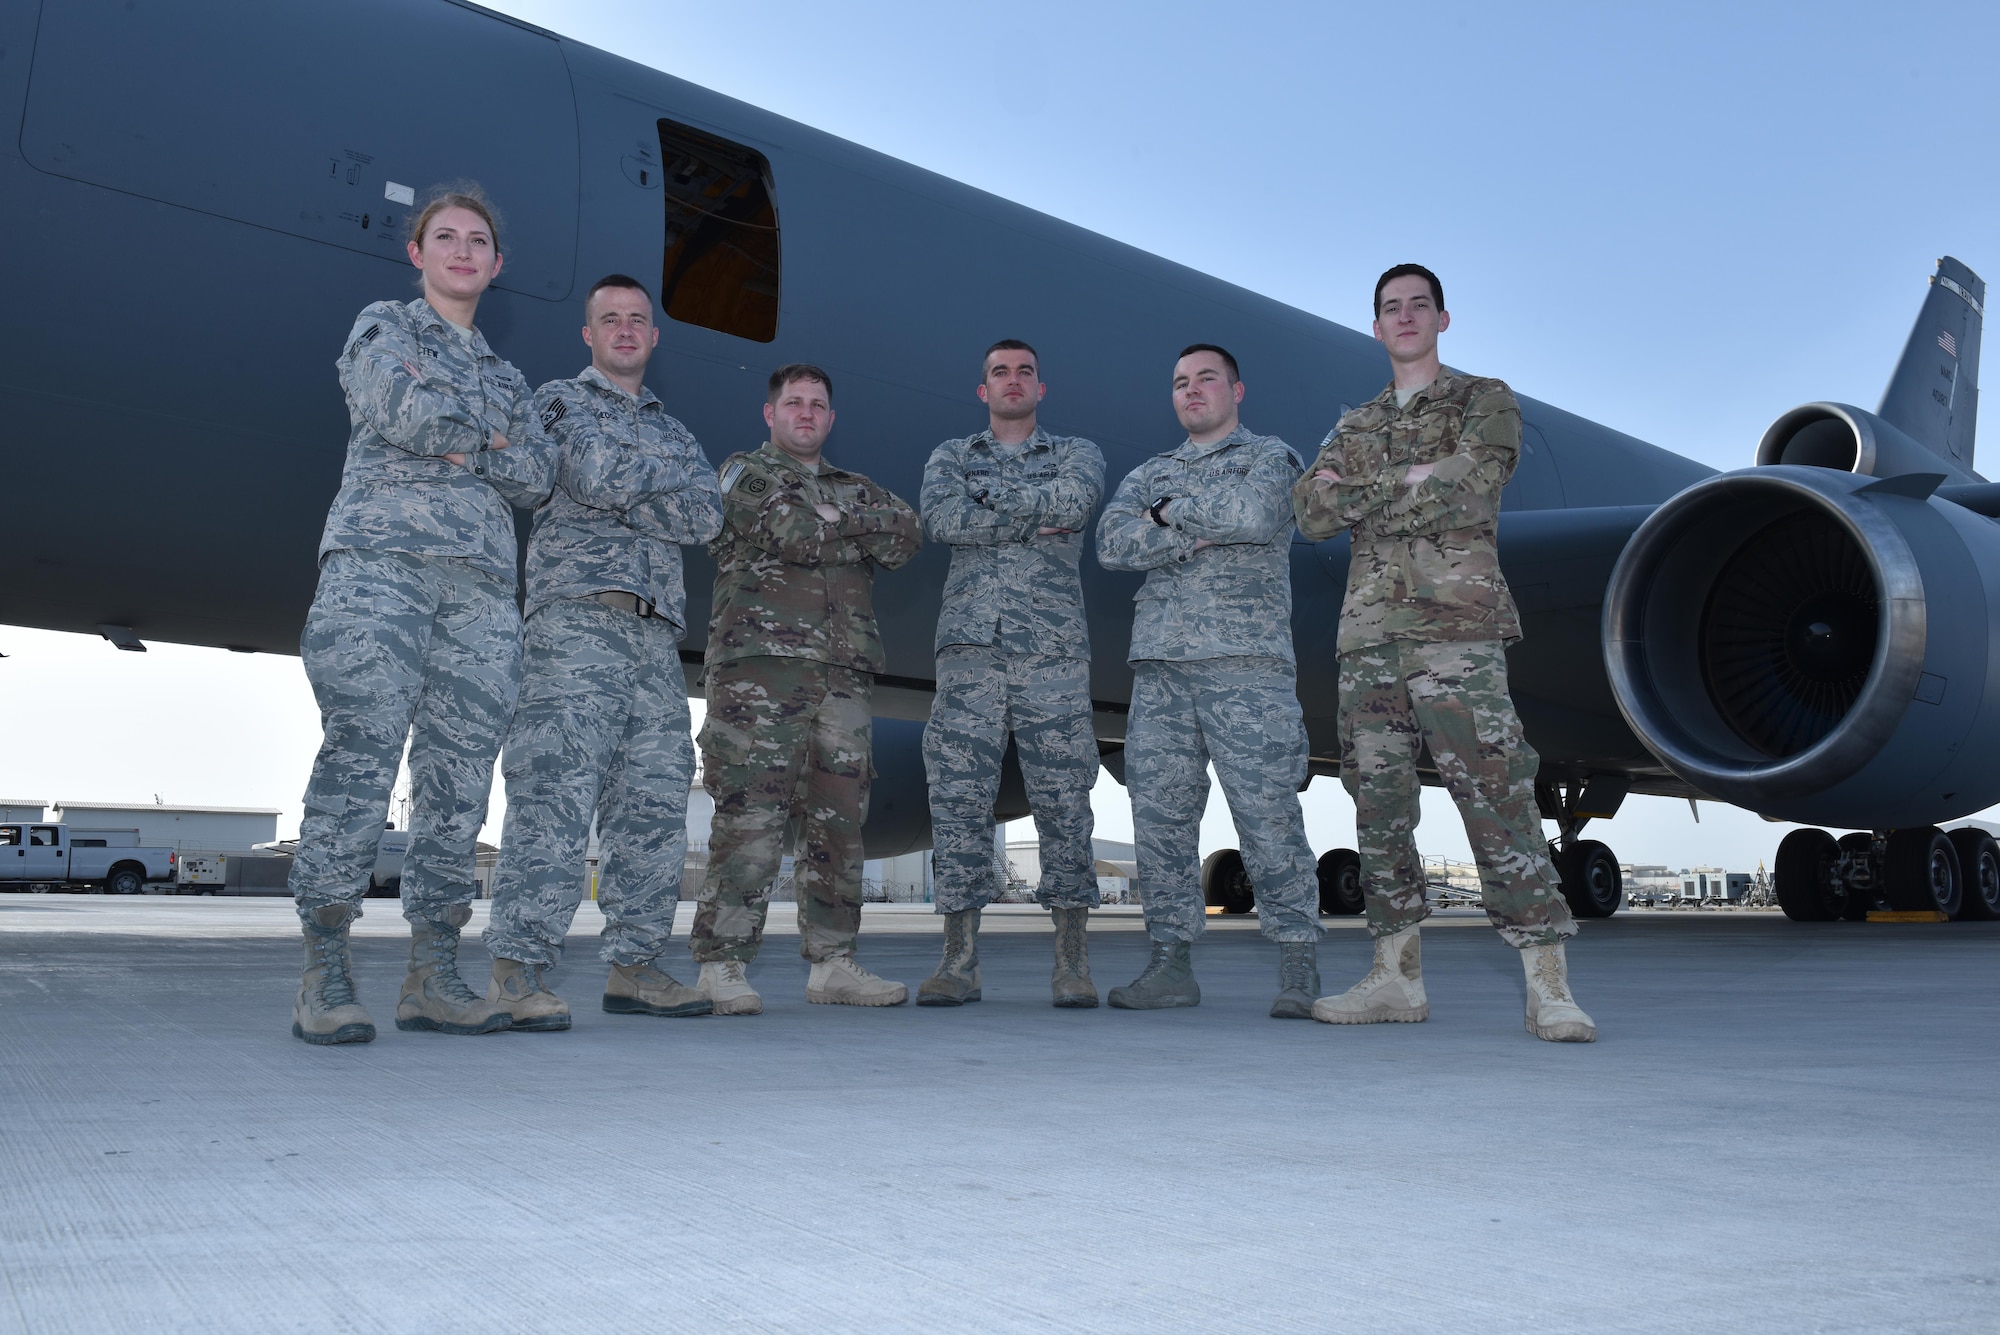 Airmen of the 380th Expeditionary Operations Support Squadron weather flight stand in front of a KC-10 Extender at an undisclosed location in southwest Asia, June 5, 2017. Forecasters play a critical role in mission planning to ensure that Airmen accomplish the mission effectively and safely. (U.S. Air Force photo by Staff Sgt. Marjorie A. Bowlden)